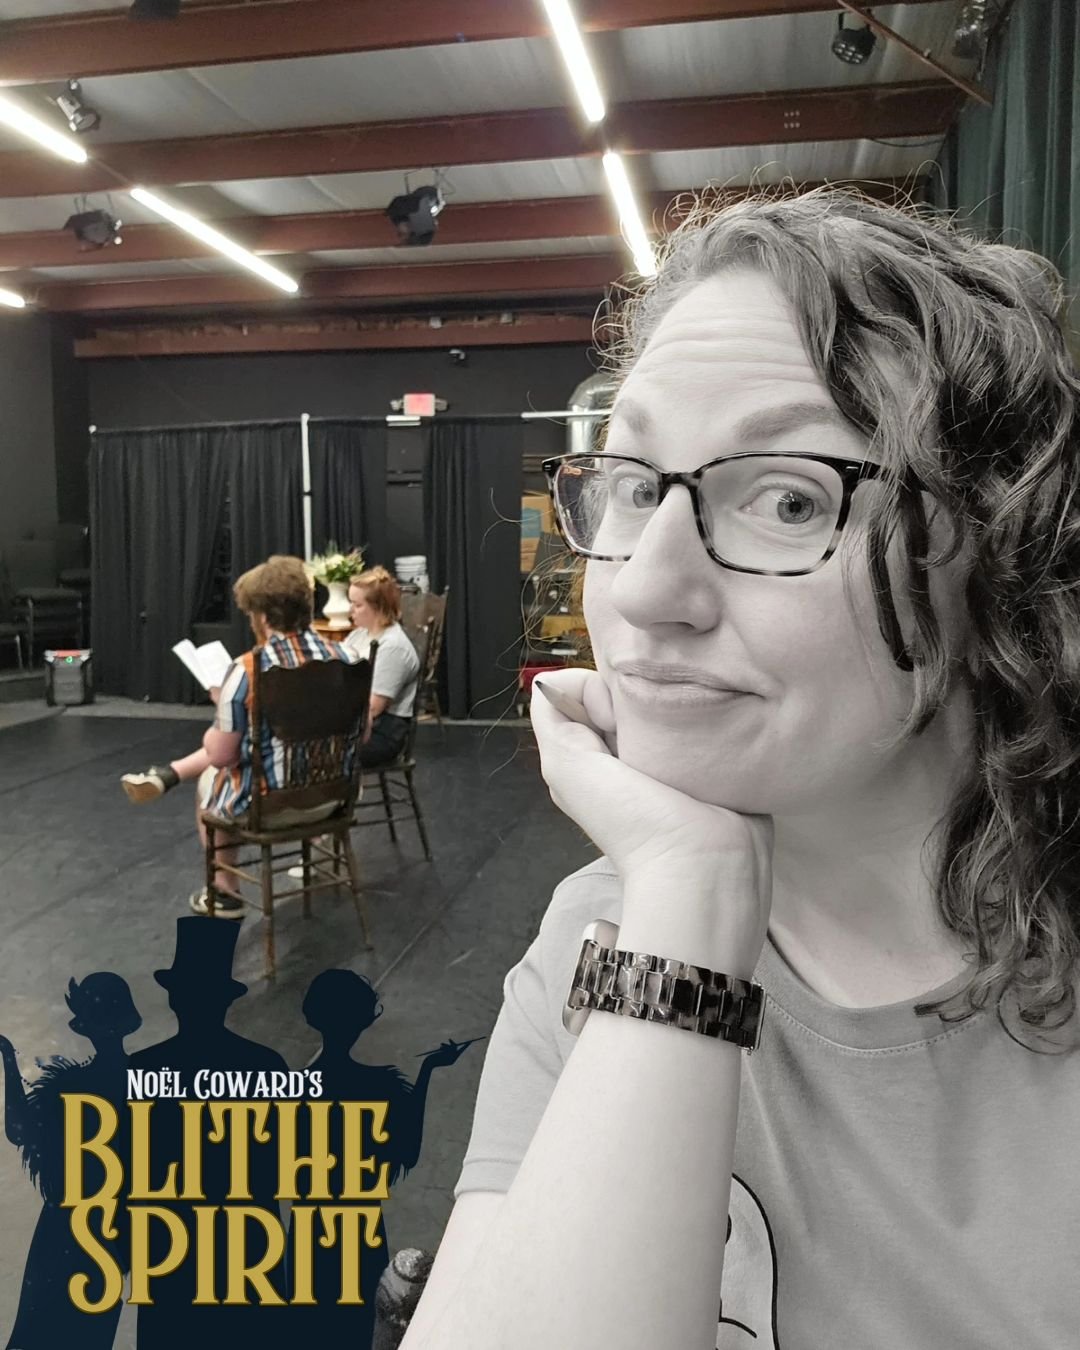 When your husband is having a nice scene with his new wife and you can hear it right down the garden.

Don't miss the chance to eavesdrop with Elvira in Blithe Spirit on May 31st &amp; June 1st. 

And visit onlyincartersvillebartow.com for more local